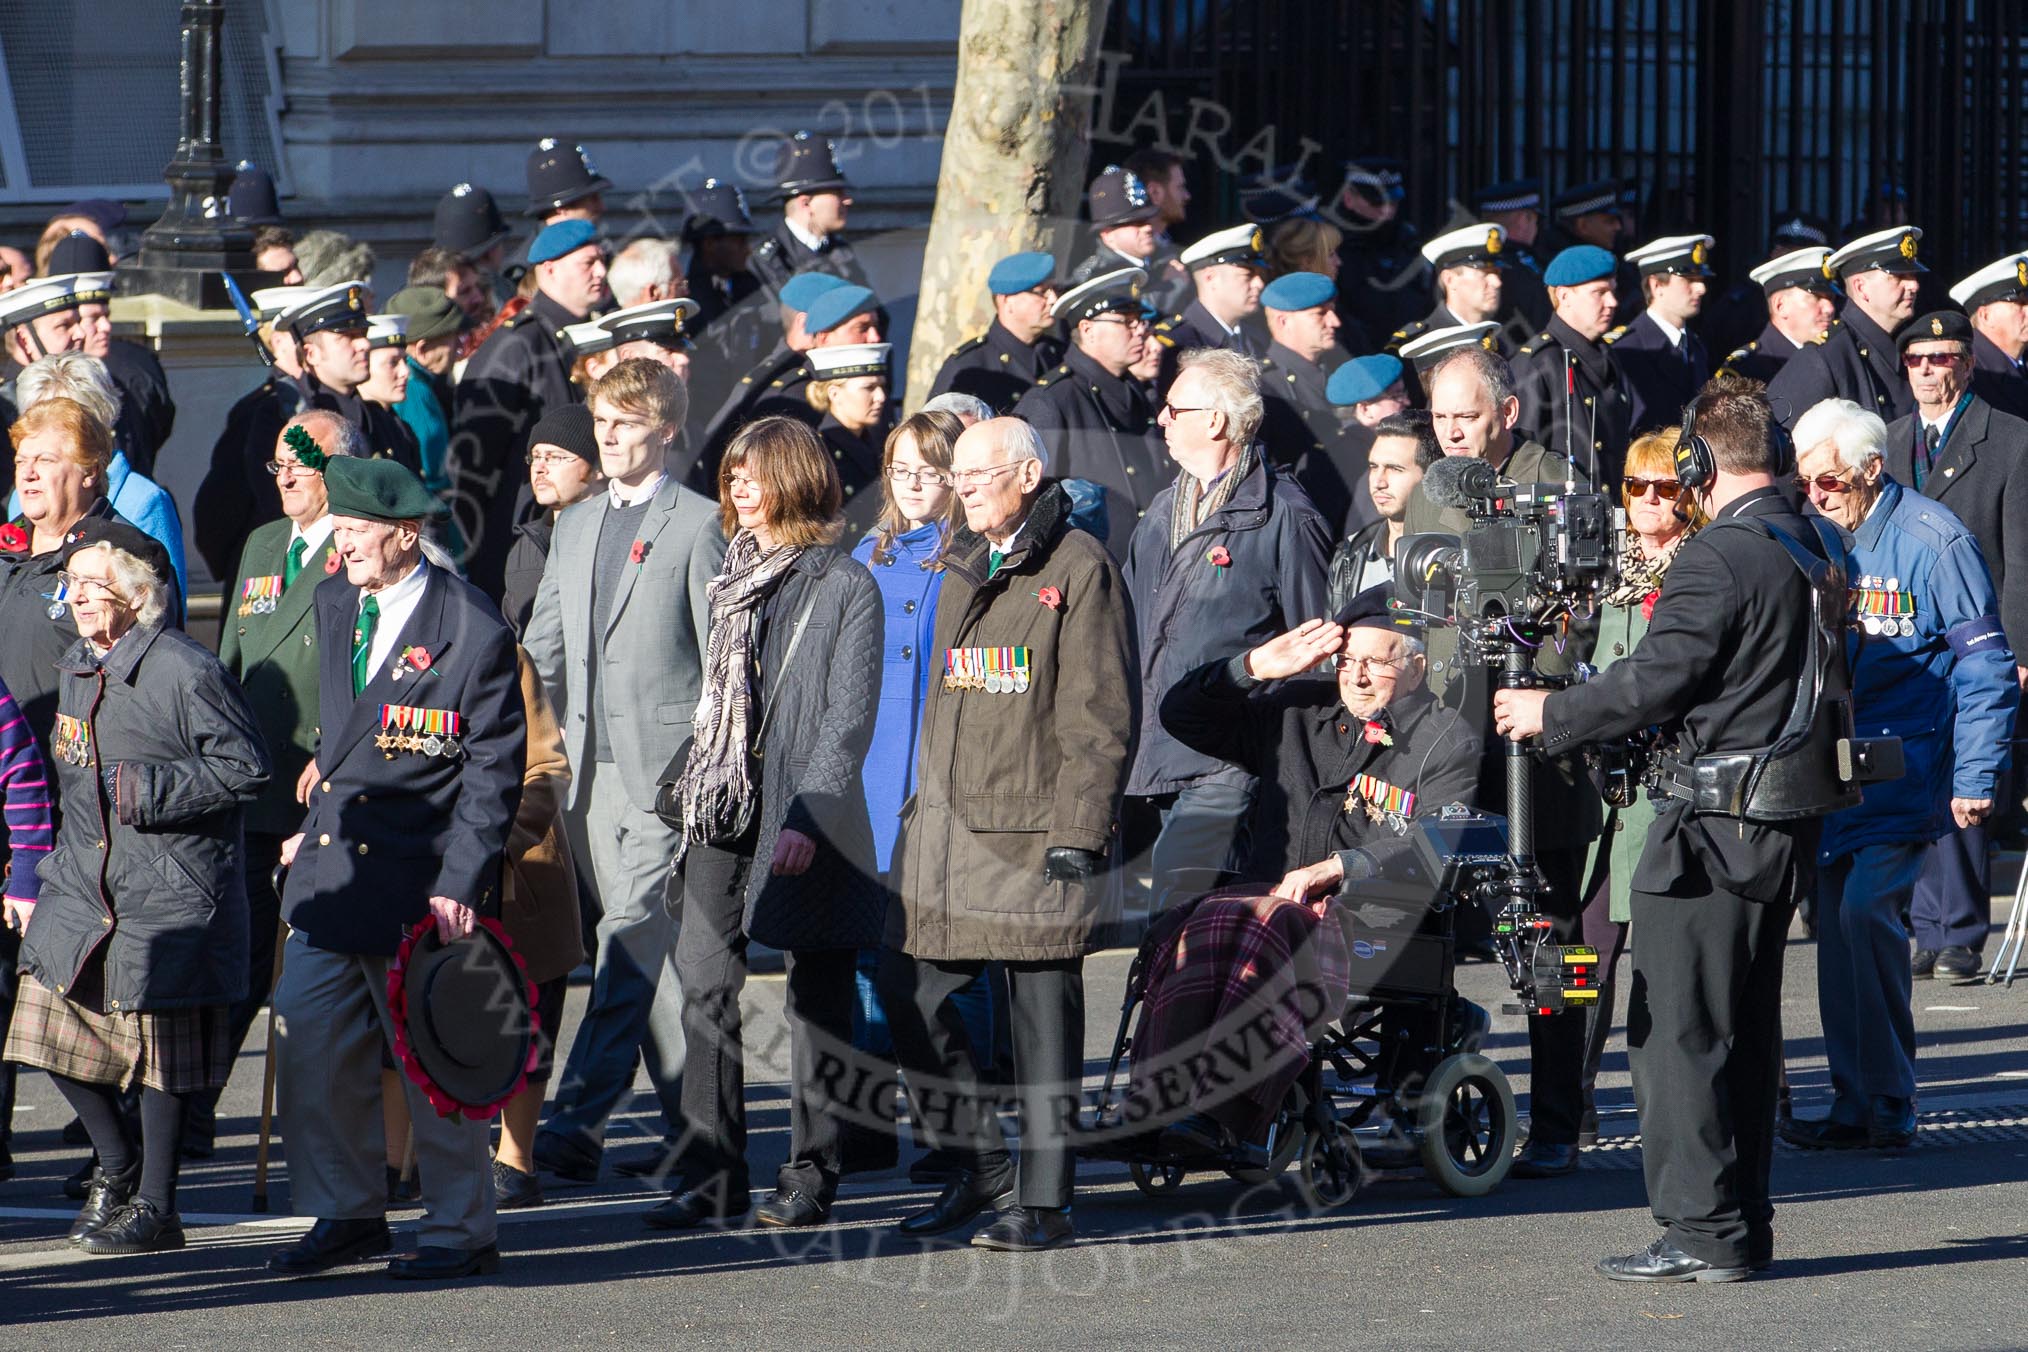 Remembrance Sunday 2012 Cenotaph March Past: Group F3 - 1st Army Association..
Whitehall, Cenotaph,
London SW1,

United Kingdom,
on 11 November 2012 at 11:45, image #401